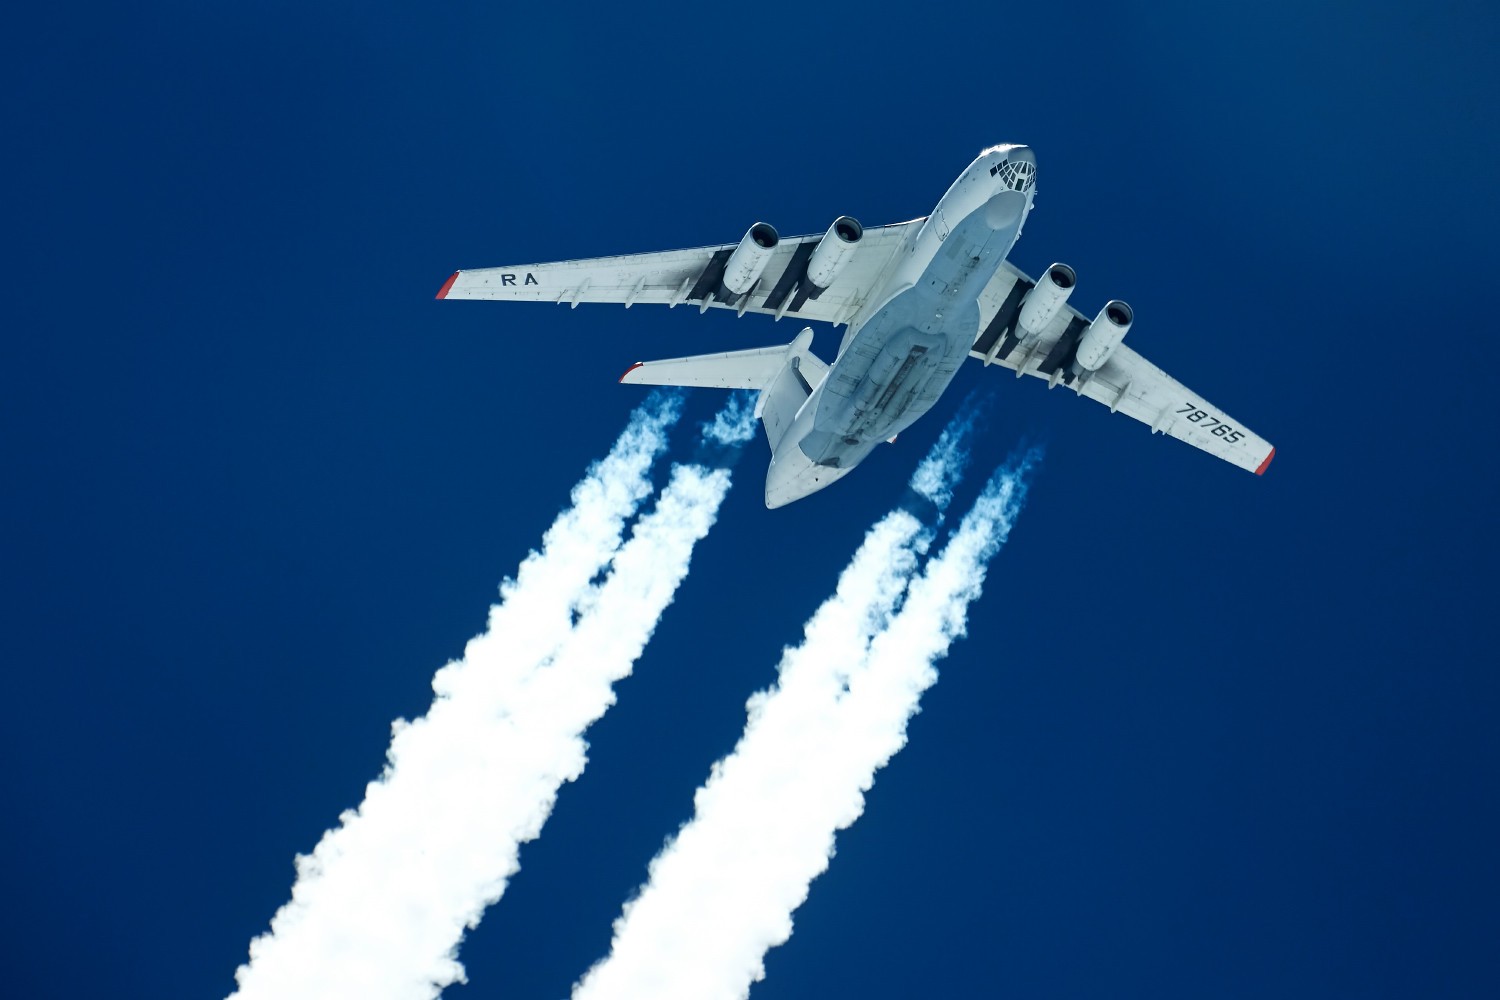 General 1500x1000 Il-76 aircraft airplane contrails vehicle blue background clear sky Ilyushin Russian/Soviet aircraft sky simple background flying smoke bottom view worm's eye view